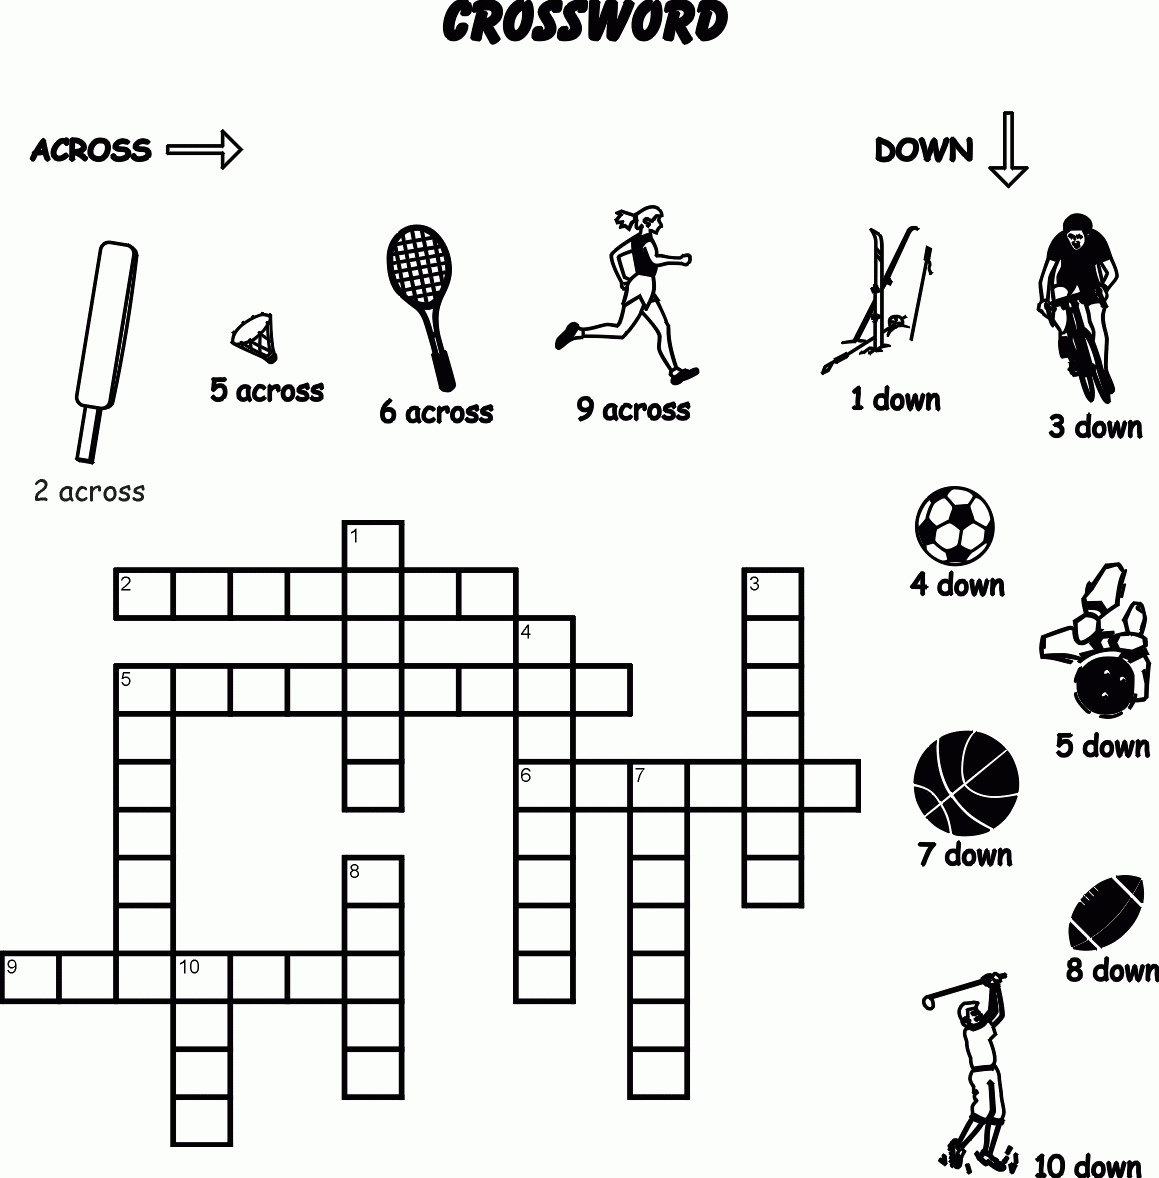 14 Sports Crossword Puzzles | Kittybabylove - Free Printable Sports - Printable Crossword Puzzles Sports